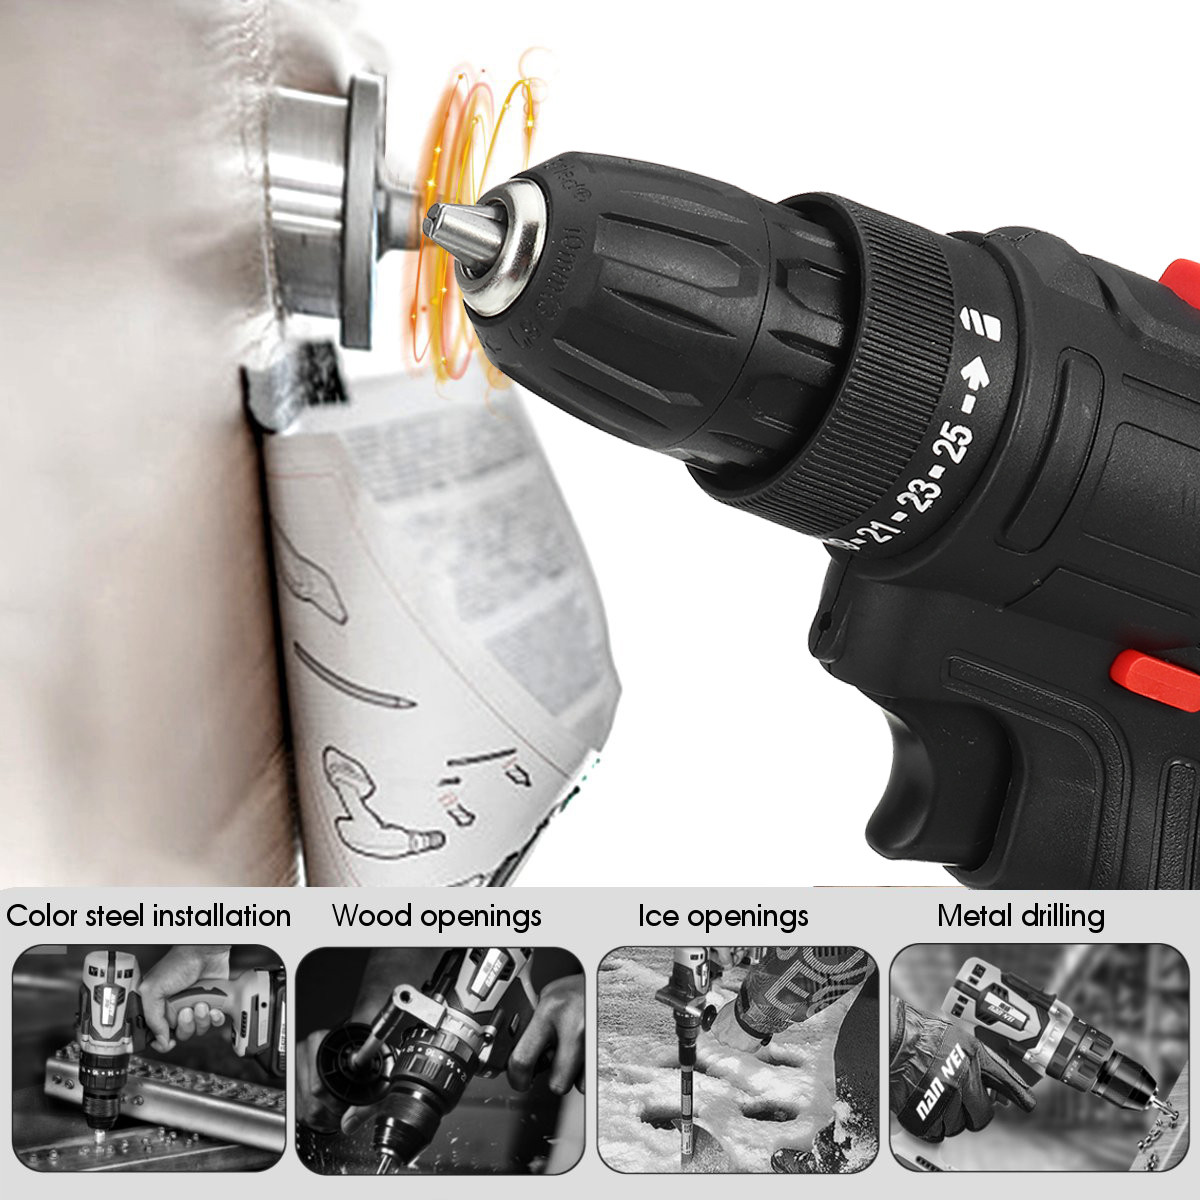 12V-LED-Cordless-Electric-Impact-Hammer-Drill-Rechargeable-Screwdriver-W-2pcs-Battery-1783496-5